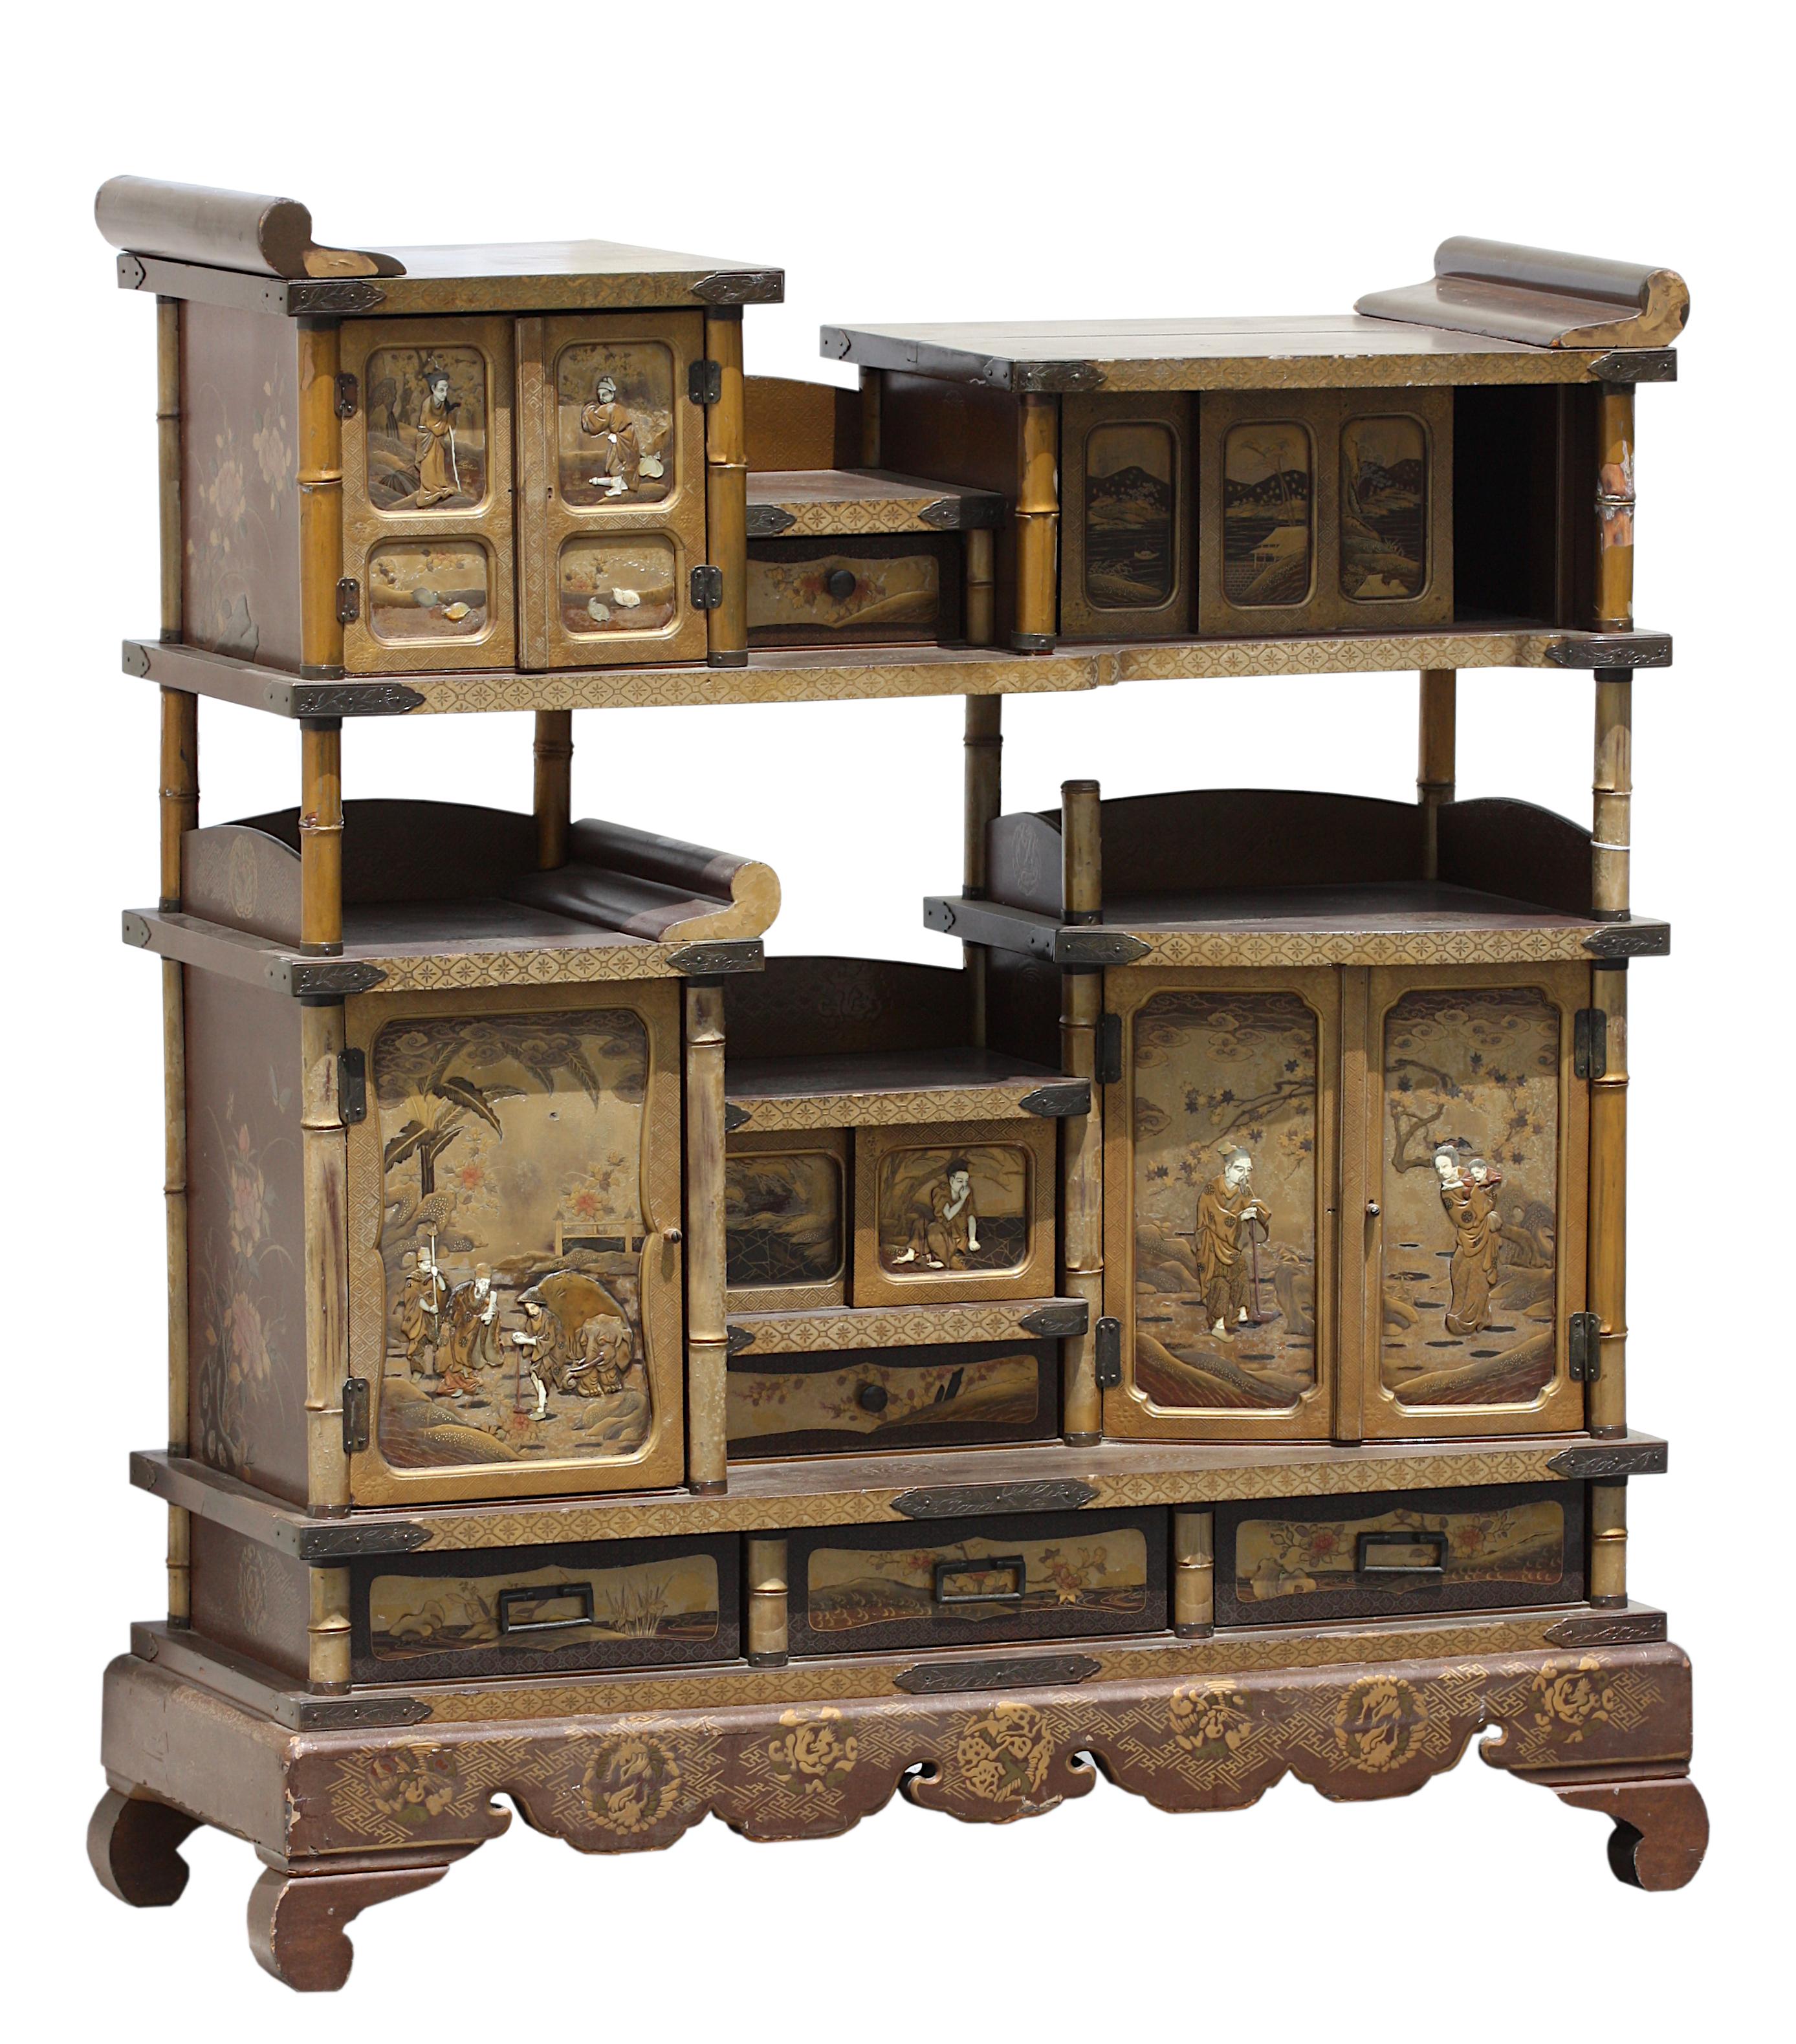 Japanese Export Lacquer Cabinet In Good Condition For Sale In West Palm Beach, FL